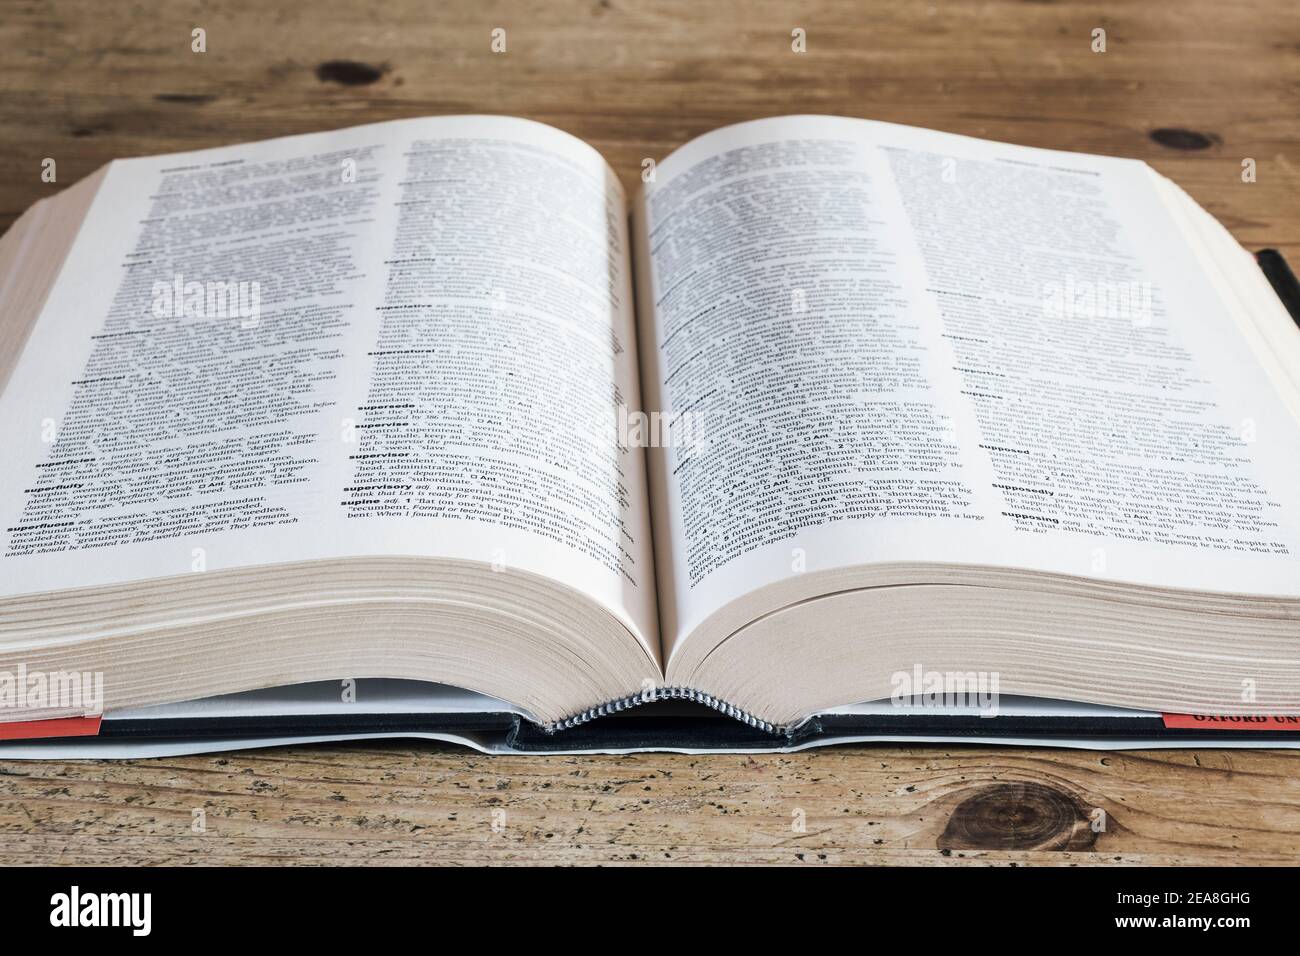 Close-up of the Oxford Thesaurus hardback reference book open on an old wooden table Stock Photo